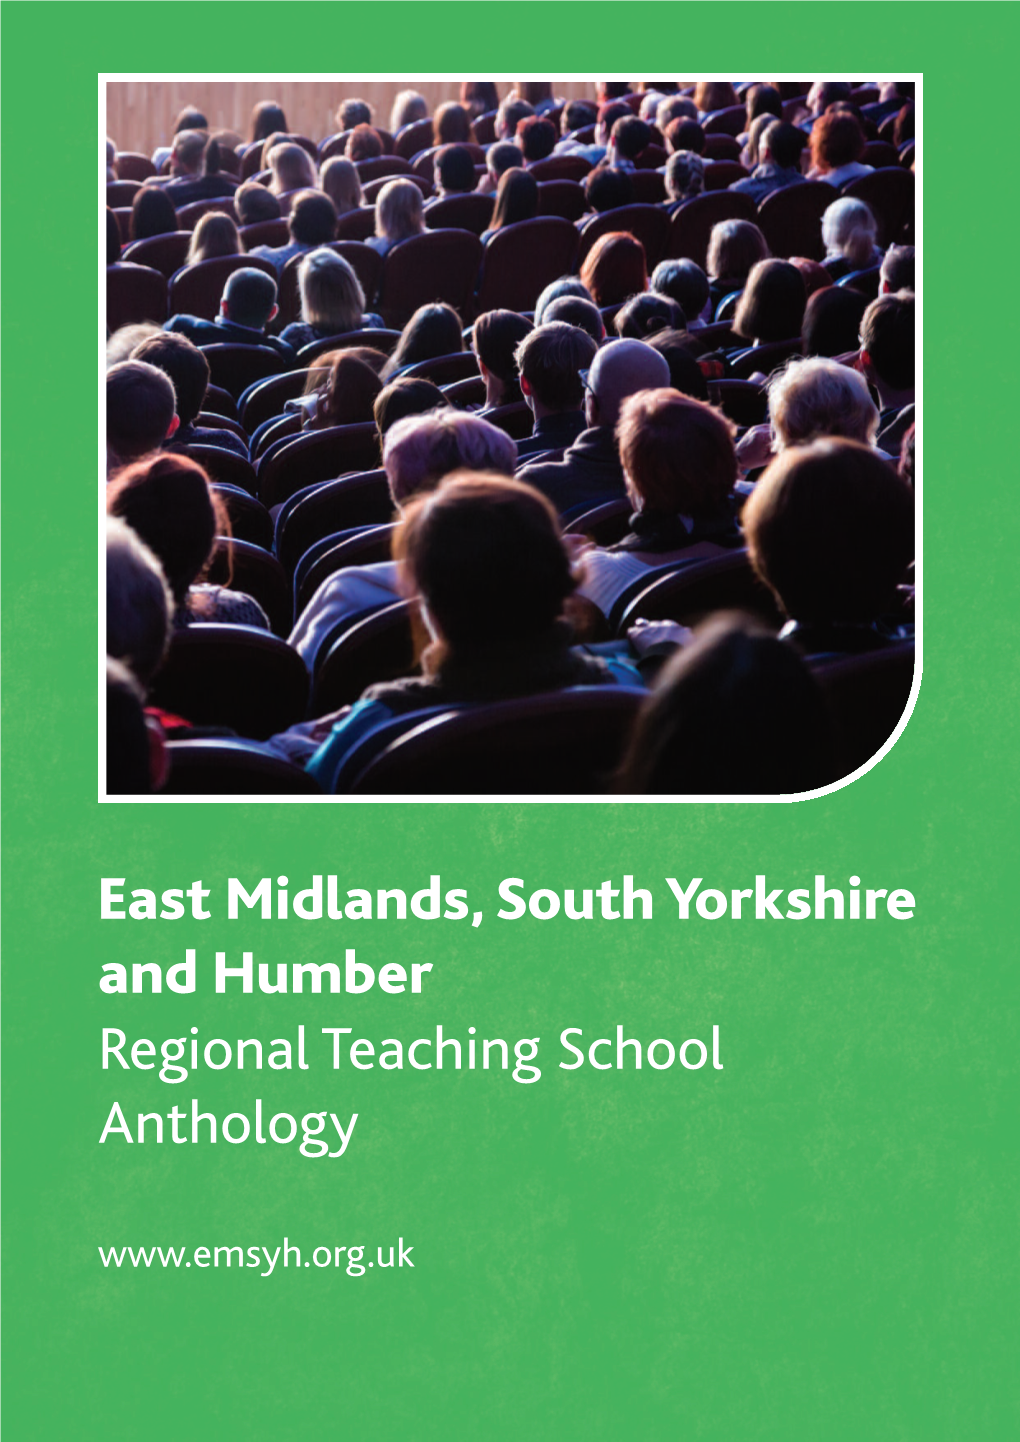 East Midlands, South Yorkshire and Humber Regional Teaching School Anthology